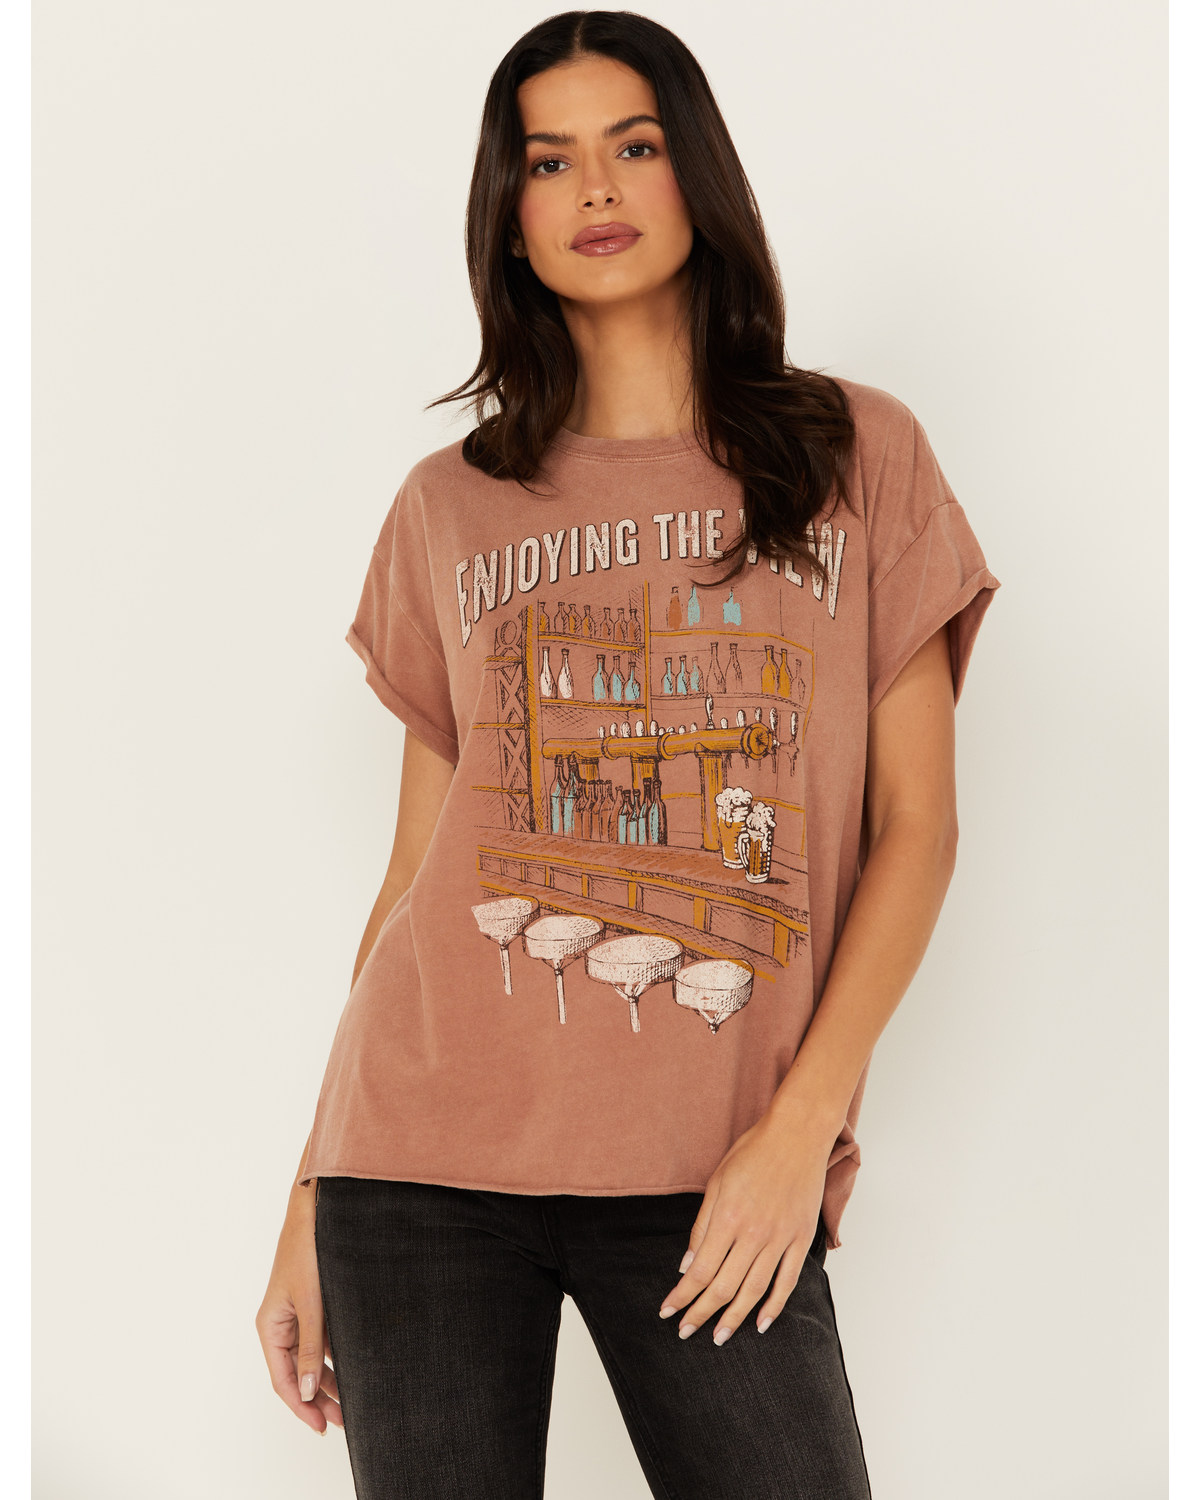 Cleo + Wolf Women's Enjoying The View Relaxed Short Sleeve Graphic Tee